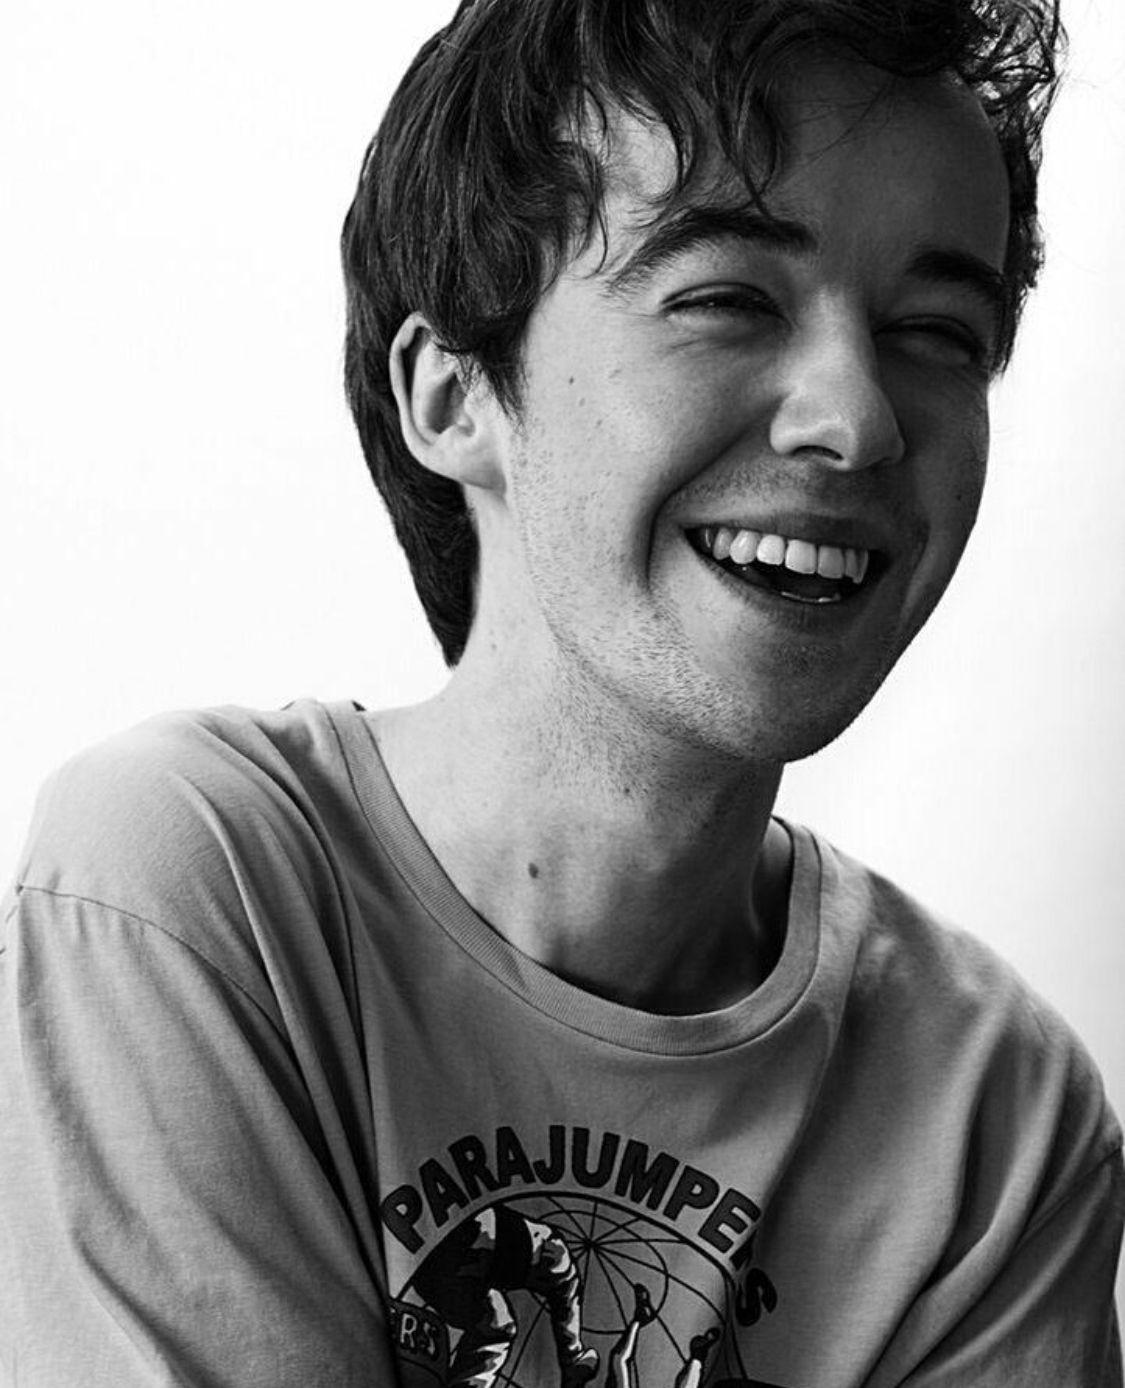 alex lawther. my inspirations for my aspirations